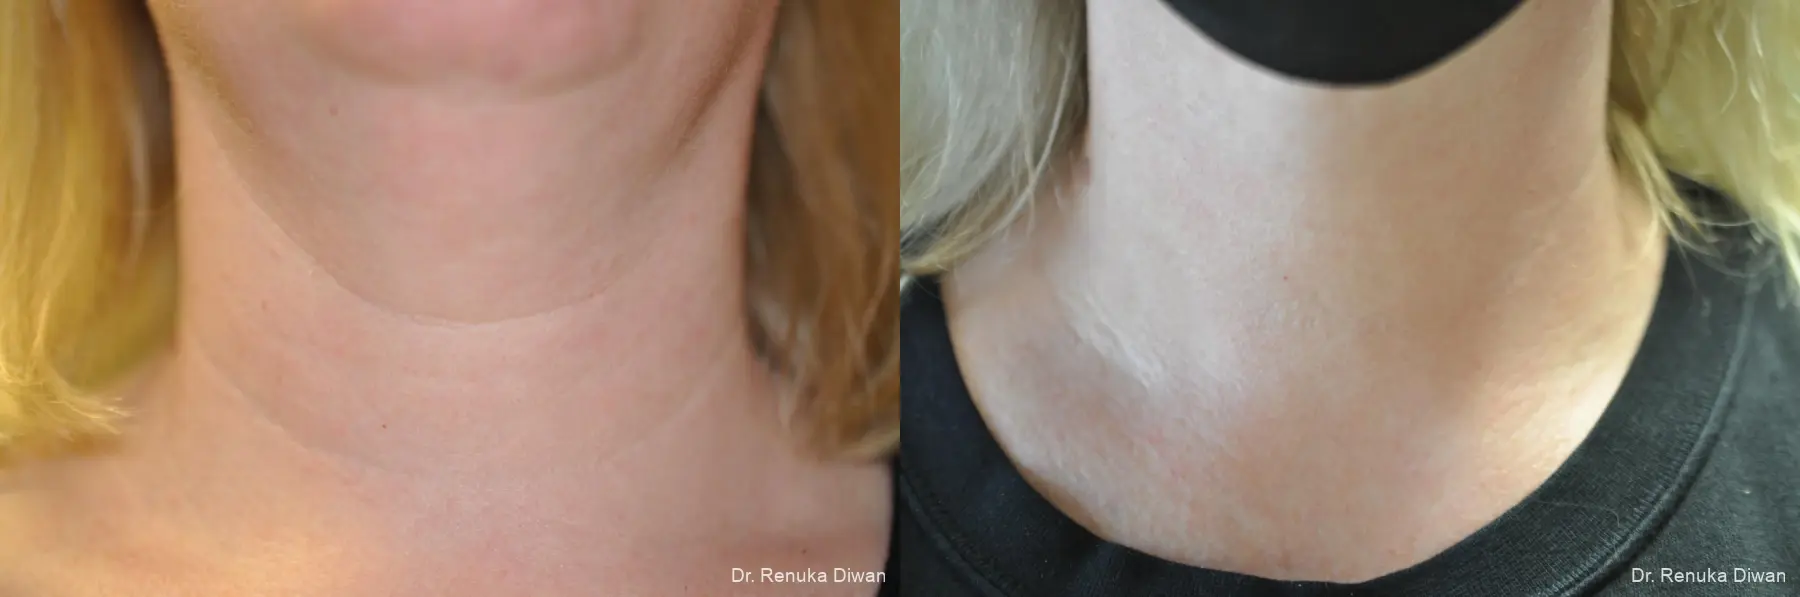 Neck Creases: Patient 5 - Before and After  